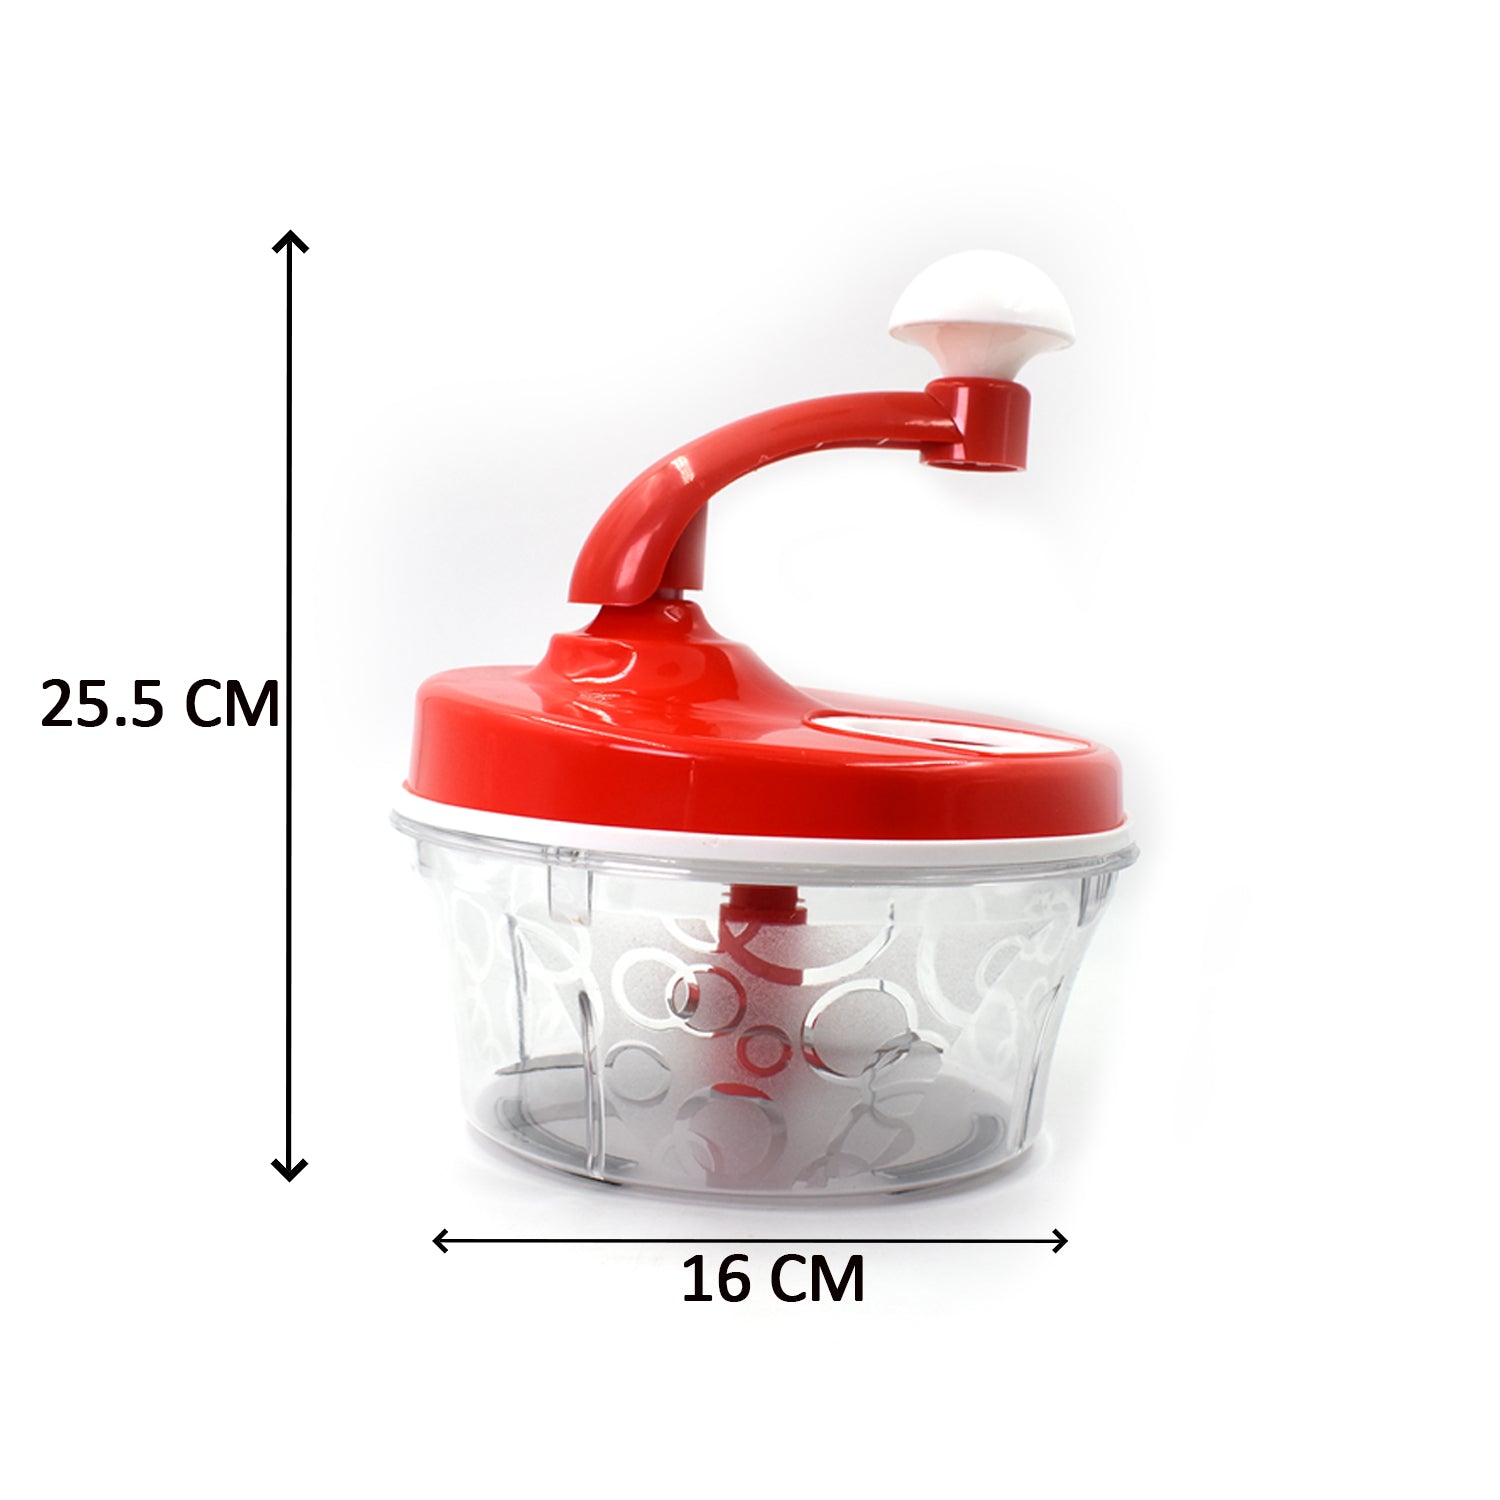 2721 10 in 1 Food Processor widely used in all kinds of household purposes for making the process of food easy and feasible with the help of these supplements and equipment’s etc.